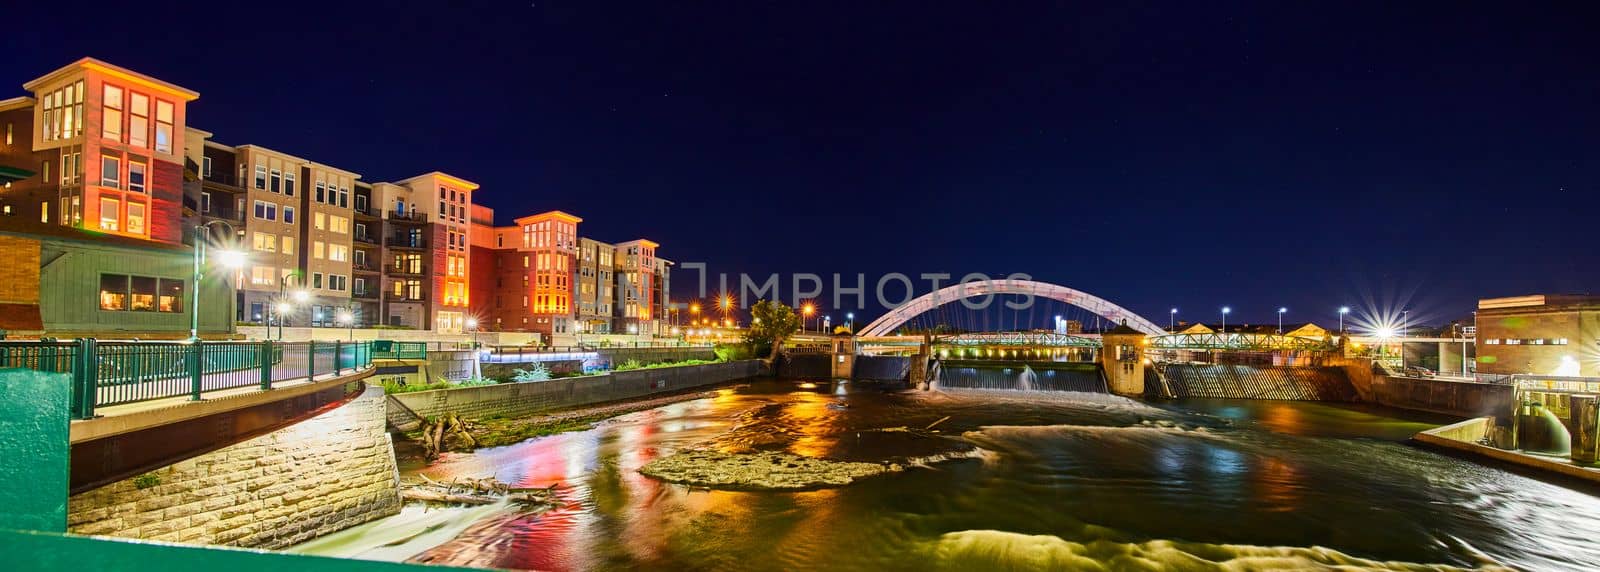 Rochester New York at night of river and bridge by njproductions